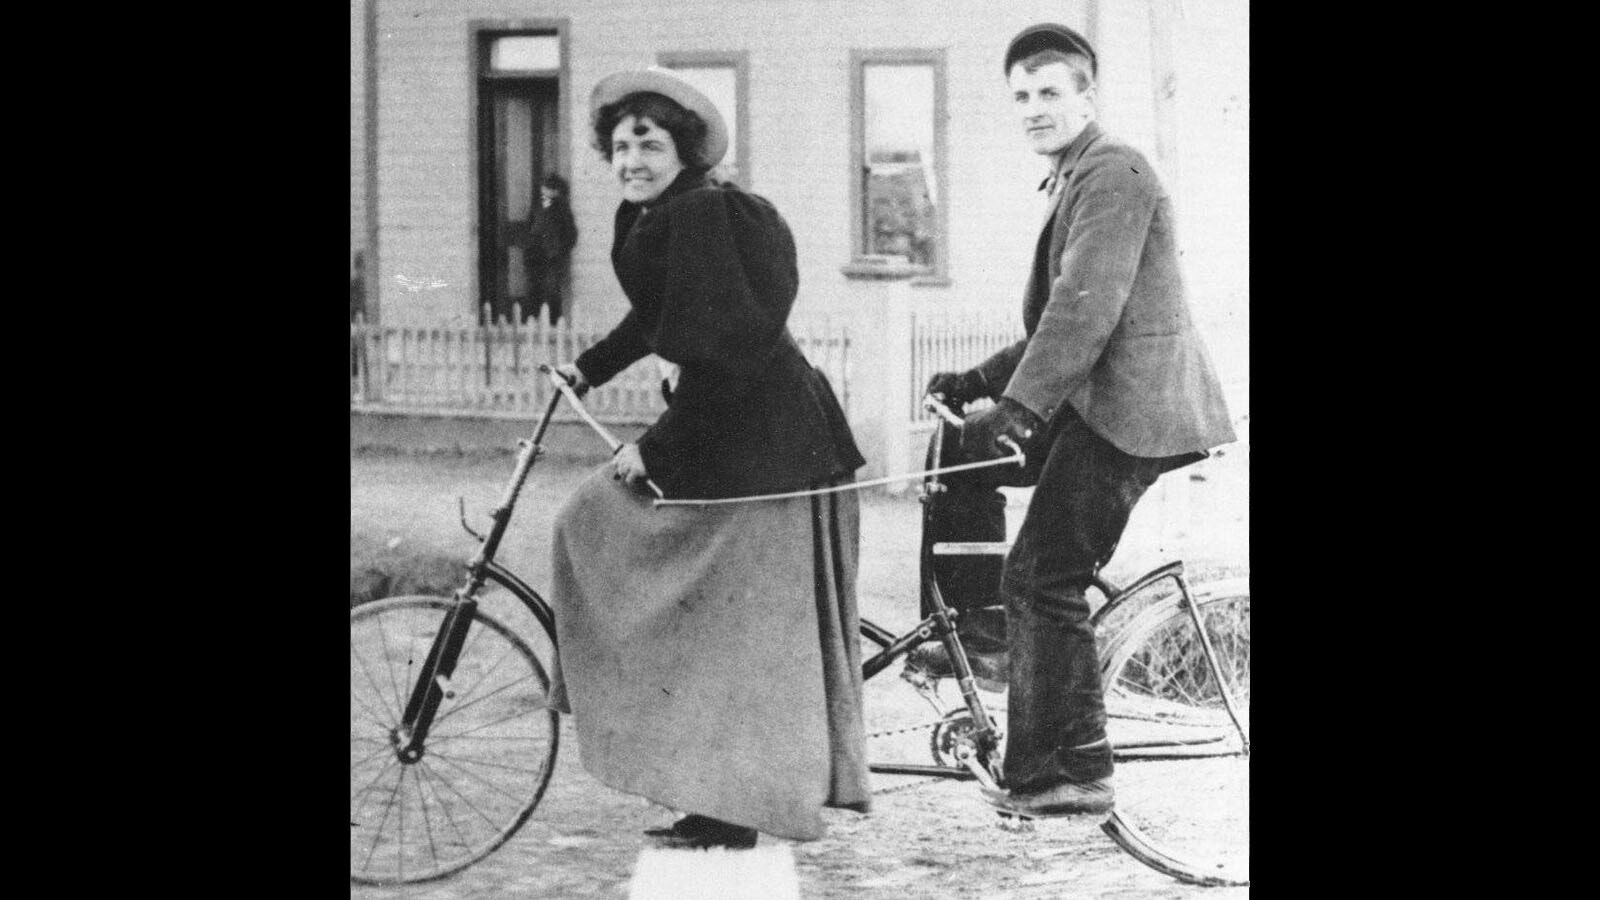 Nellie and Elmer Lovejoy enjoy a bike ride on a tandem bicycle he built.